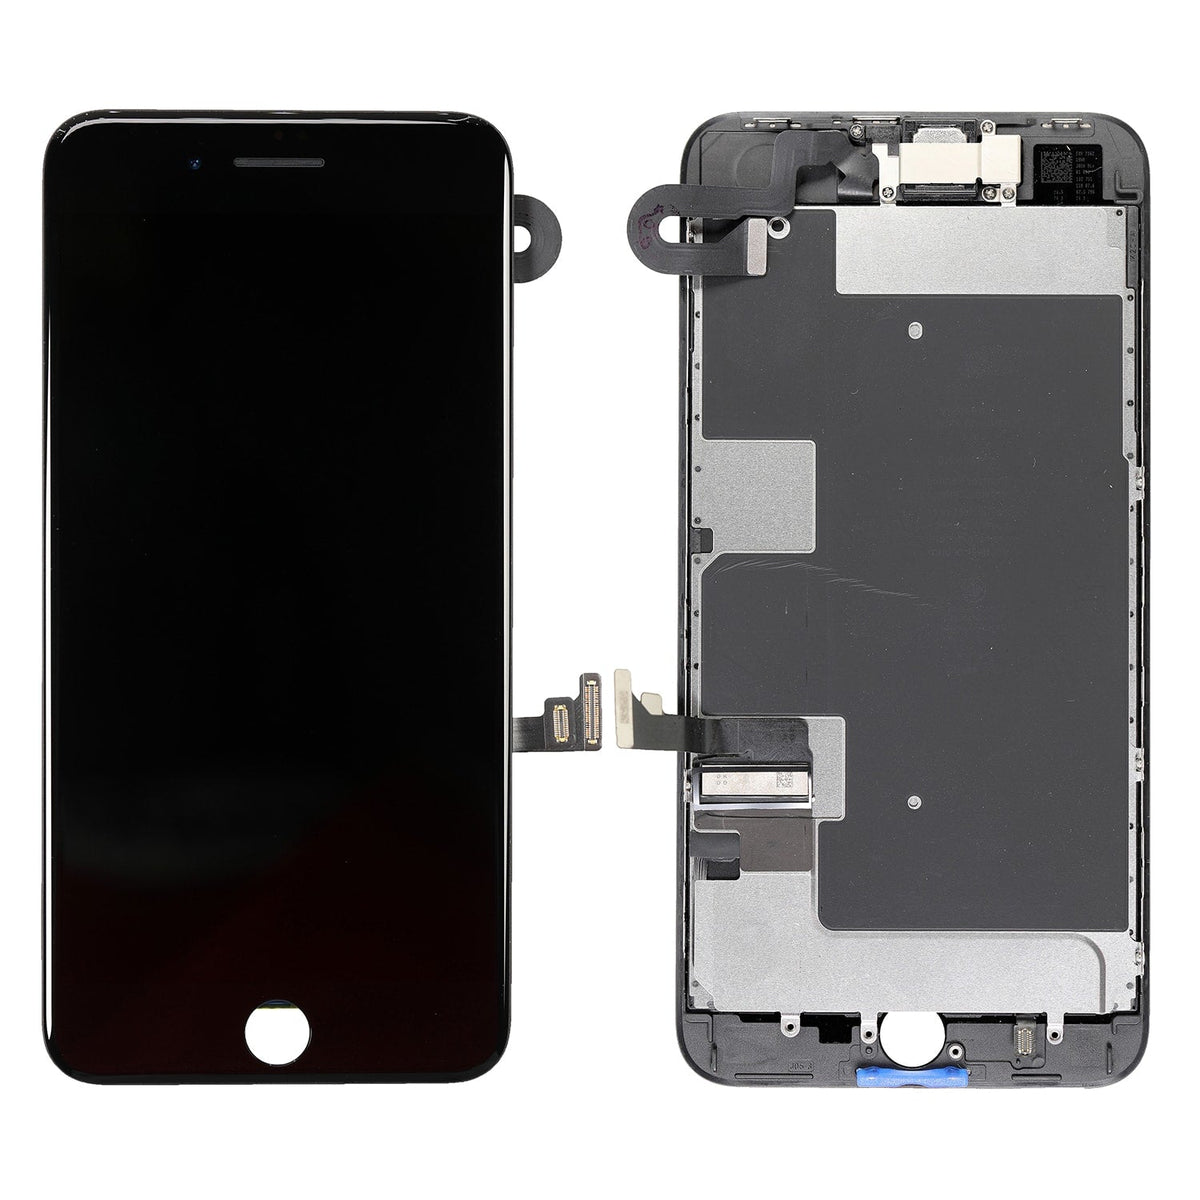 BLACK LCD SCREEN FULL ASSEMBLY WITHOUT HOME BUTTON FOR IPHONE 8 PLUS